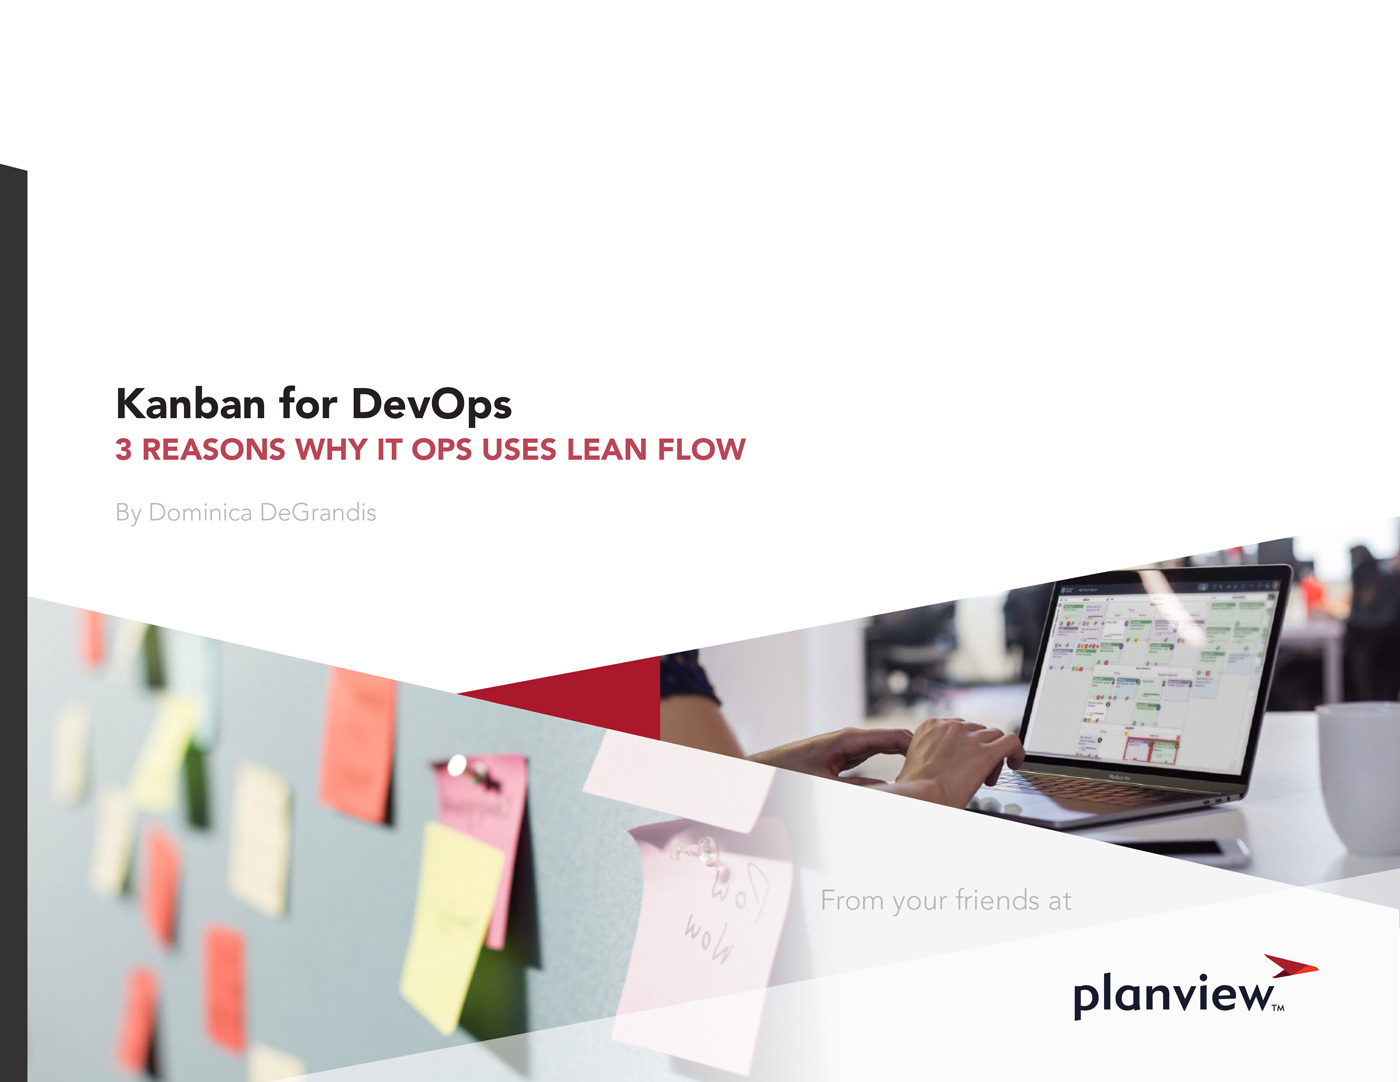 3 Reasons Why IT Ops Uses Lean Flow